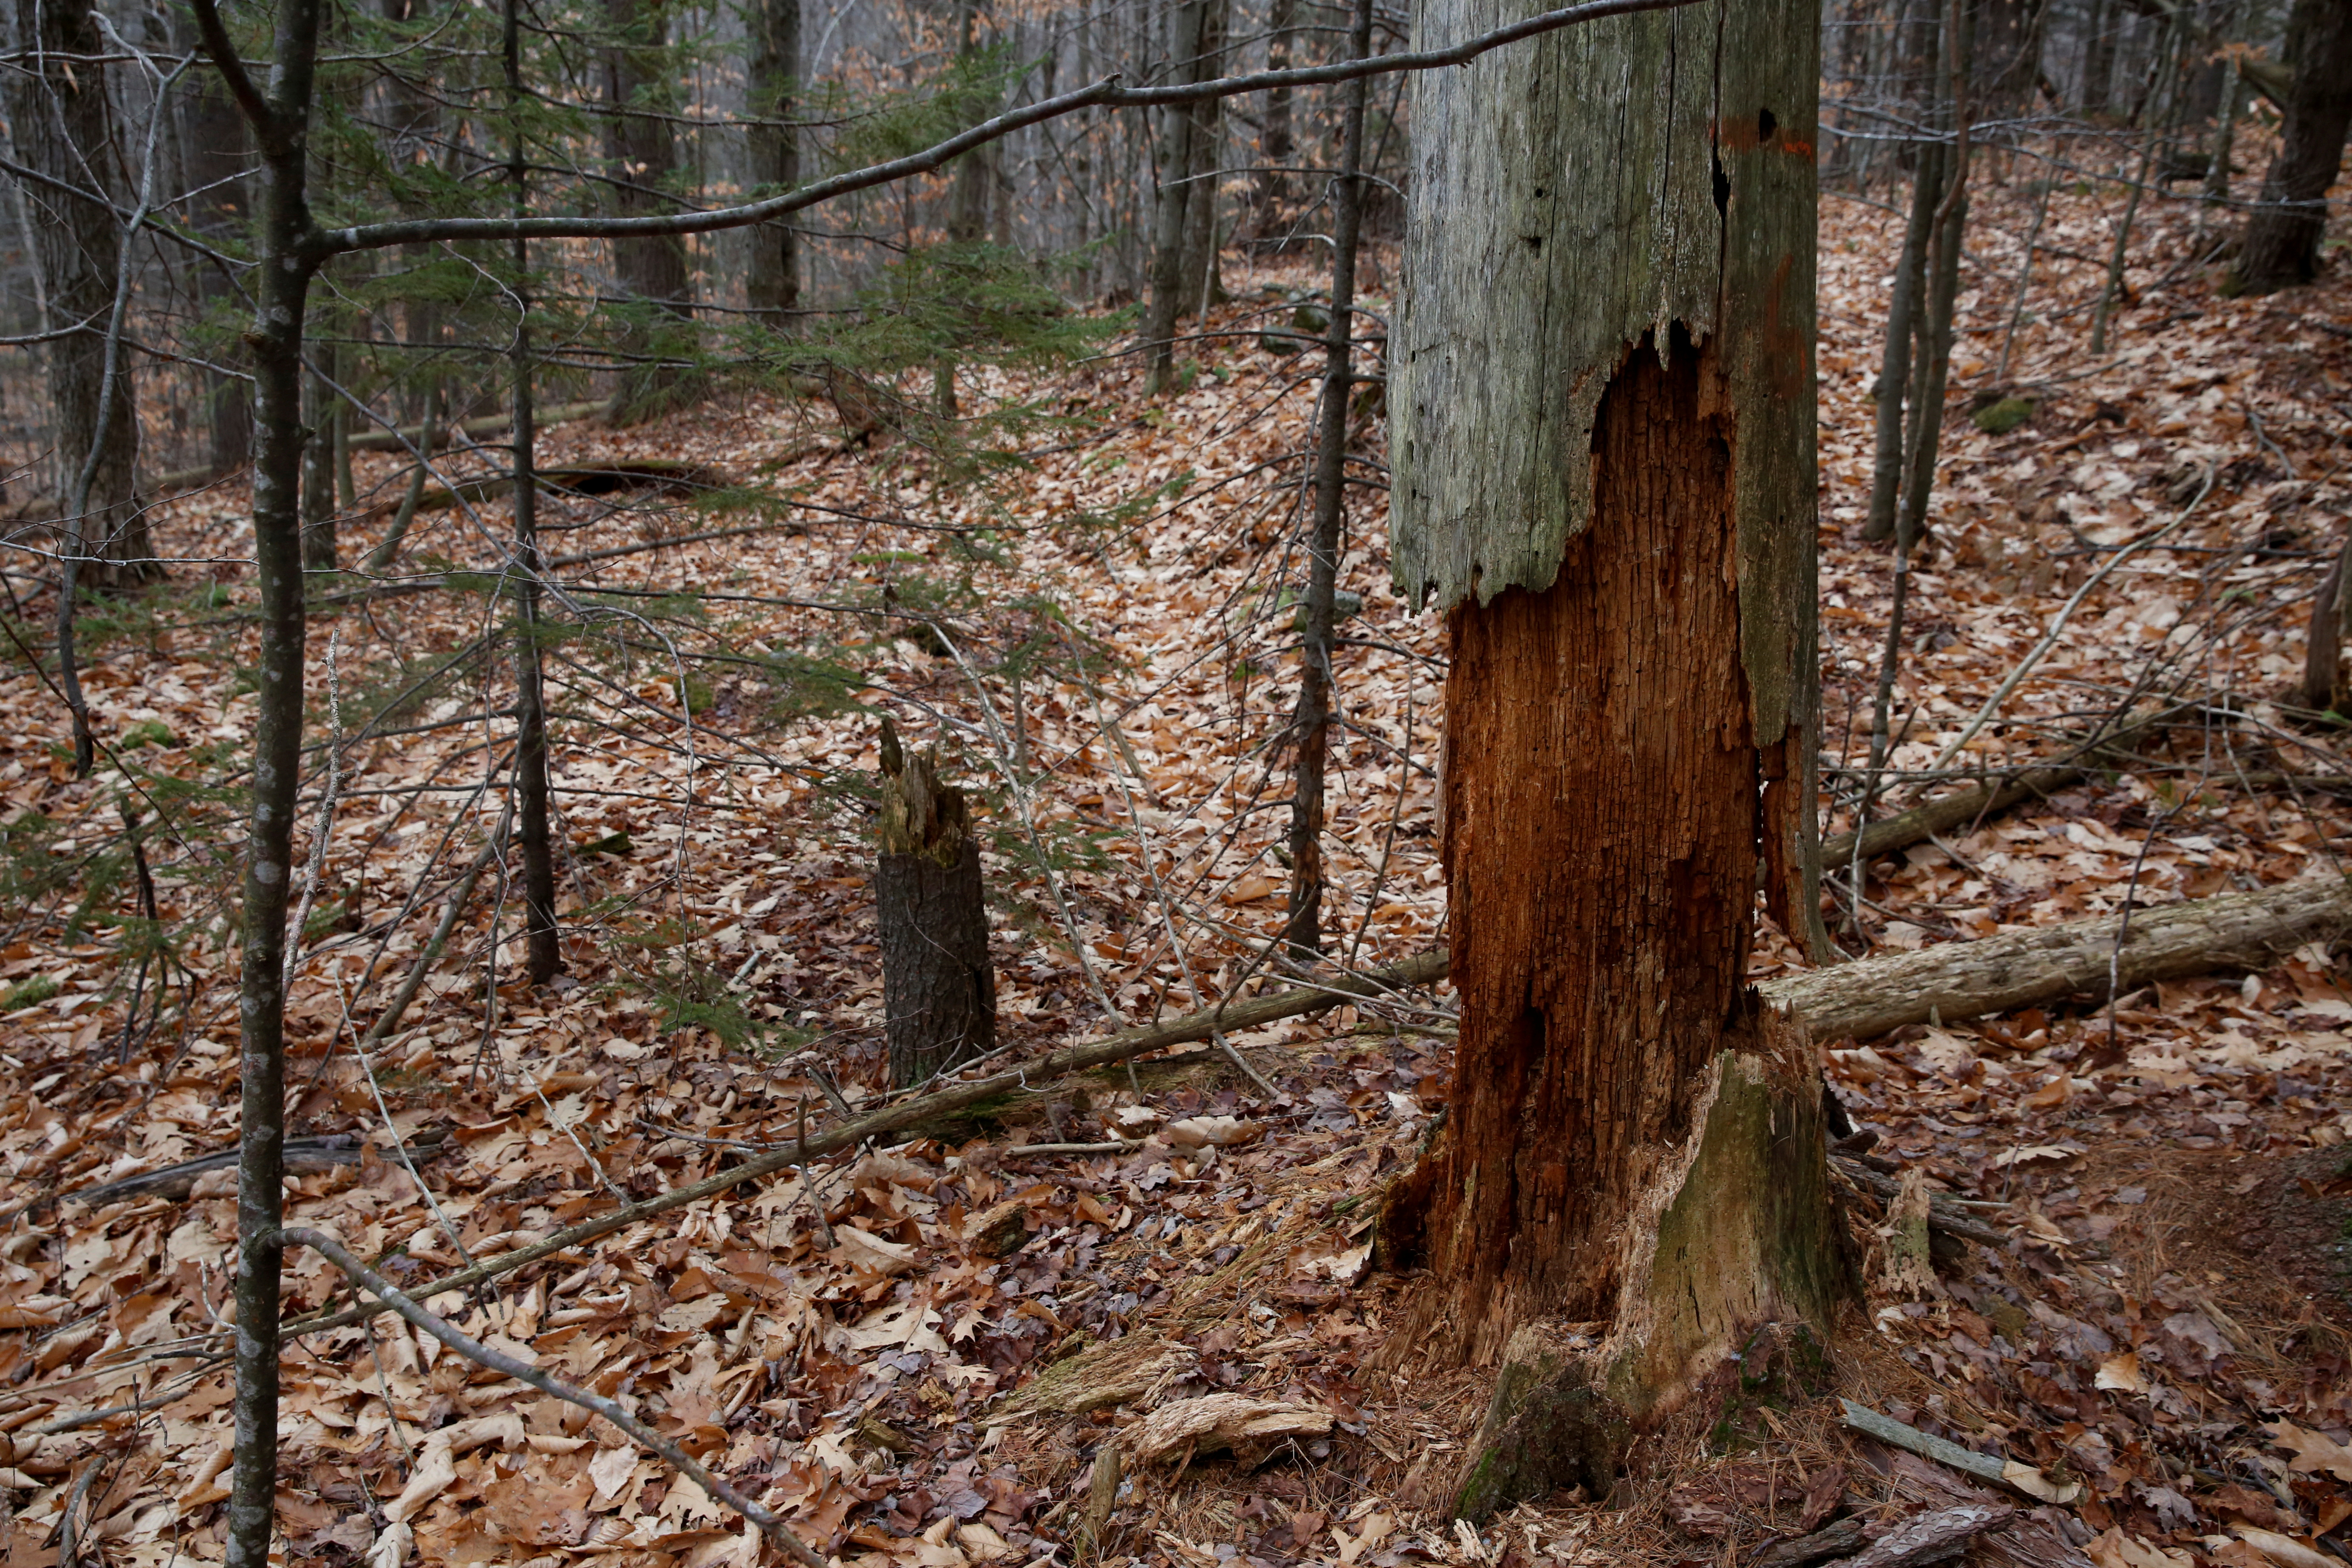 A dead tree assessed for its carbon content is seen in the Hersey Mountain Wilderness, New Hampshire, U.S.